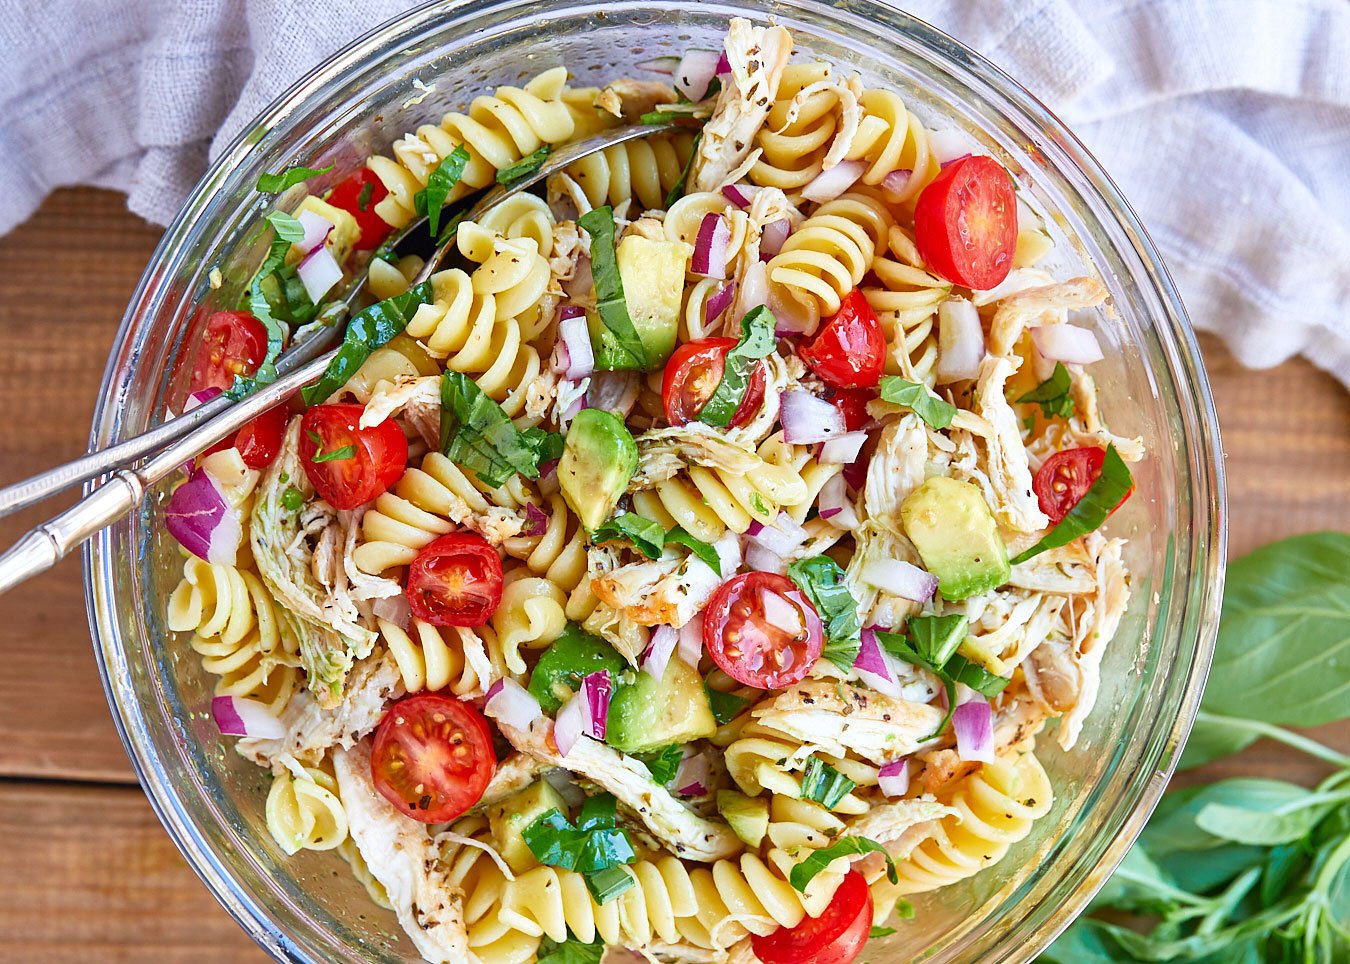 10 Healthy Pasta Salad Ideas Perfect for a Potluck or Cold Meal prep